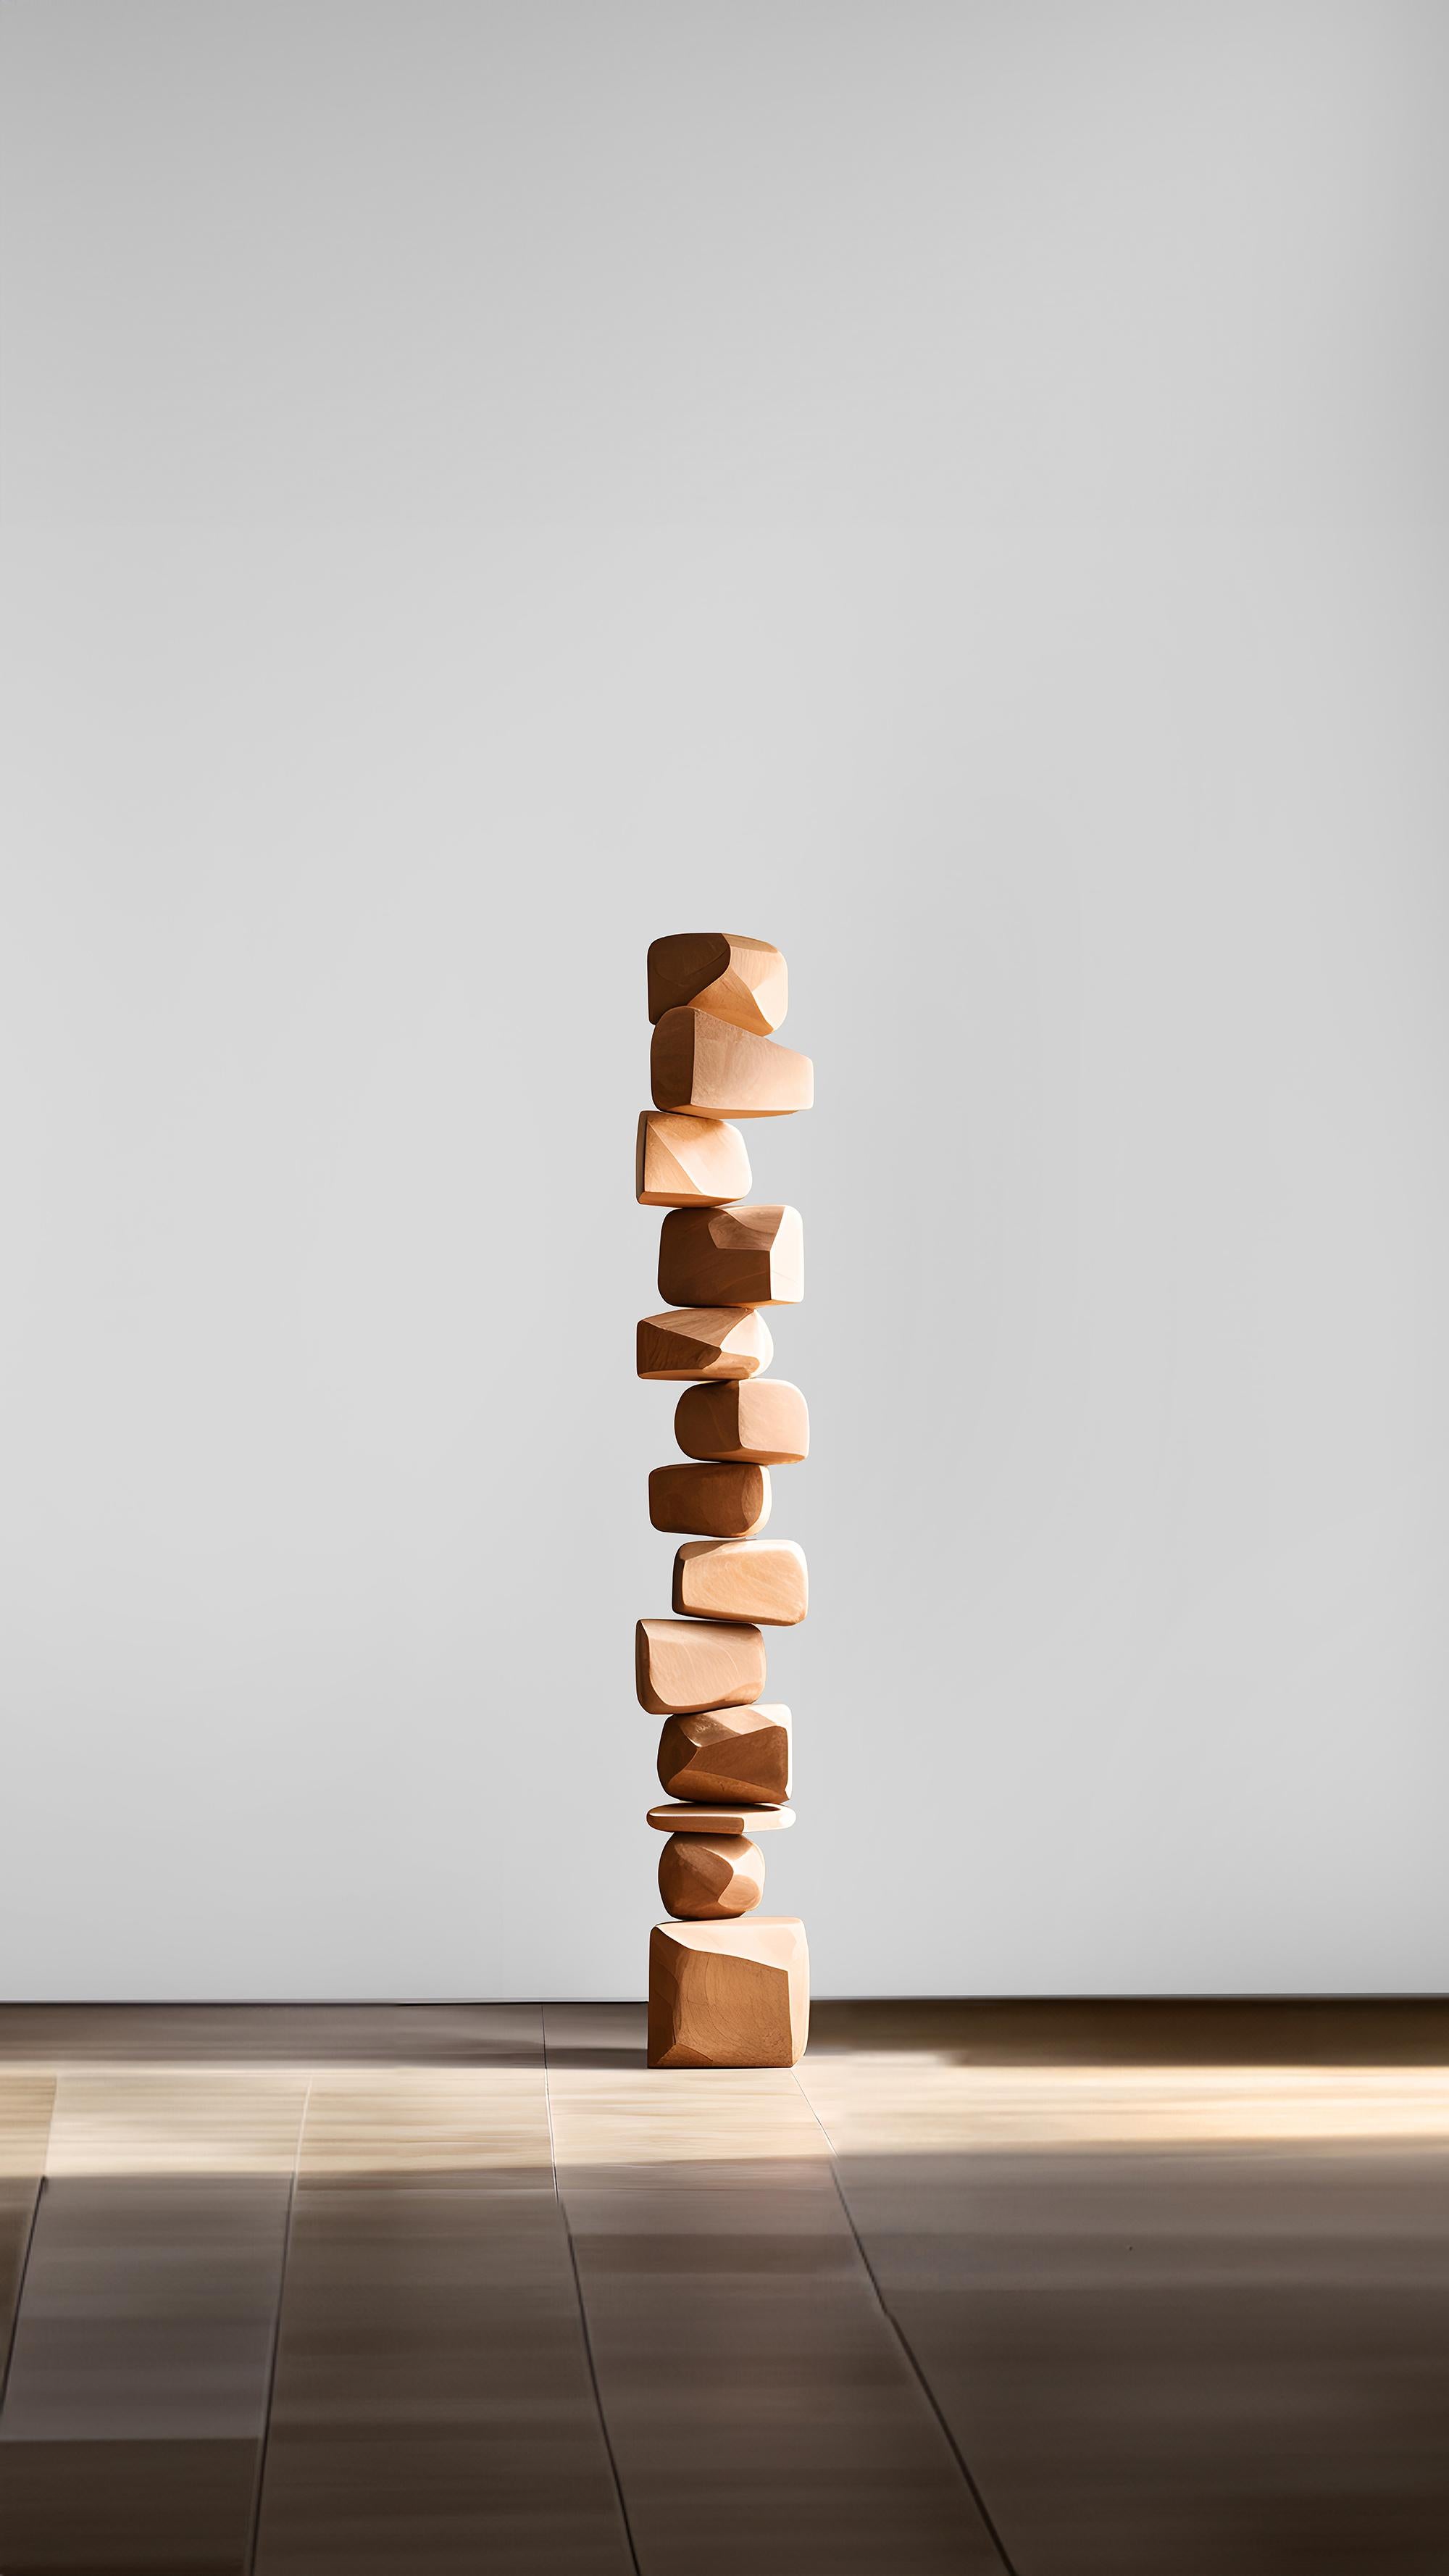 Hand-Crafted Still Stand No52: Modern Abstract Wooden Sculpture by NONO, Escalona Design For Sale